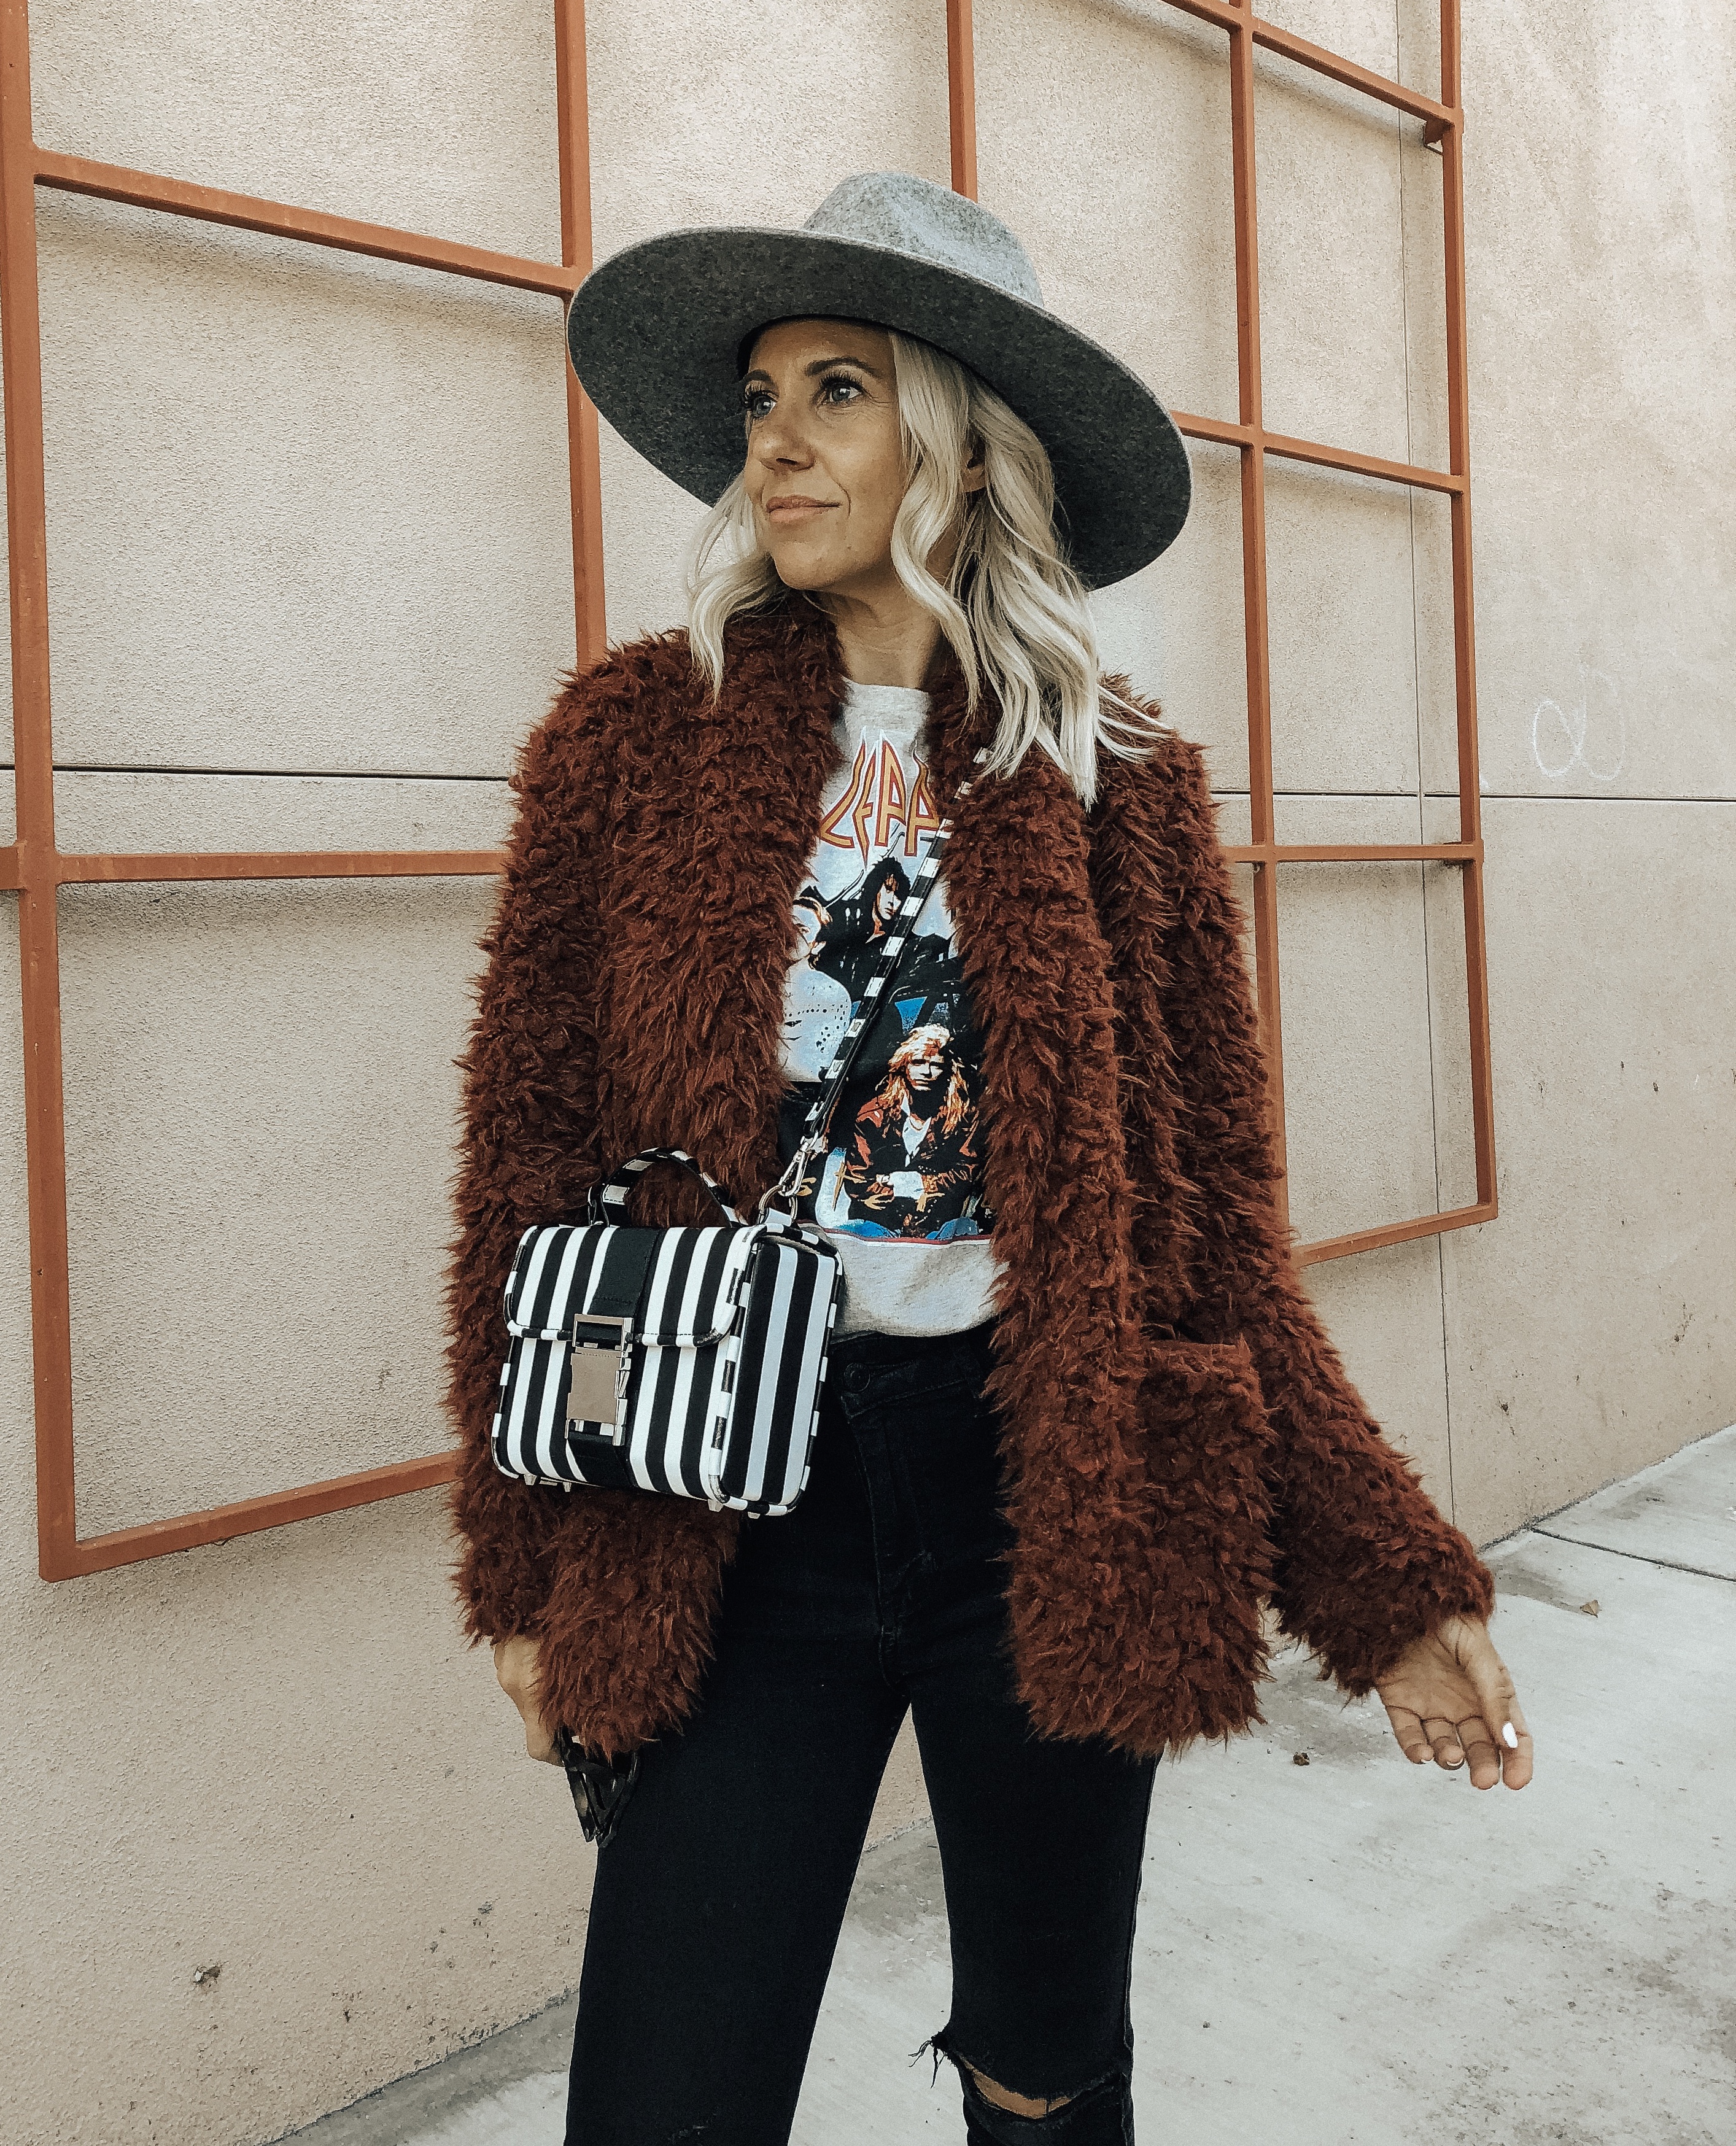 NORDSTROM RACK FINDS- Jaclyn De Leon Style + faux fur jacket + fall fashion + shopping tips + cozy casual outerwear + winter coats + street style + gray wide brim hat + band tee + striped handbag + outfit inspiration + mom style